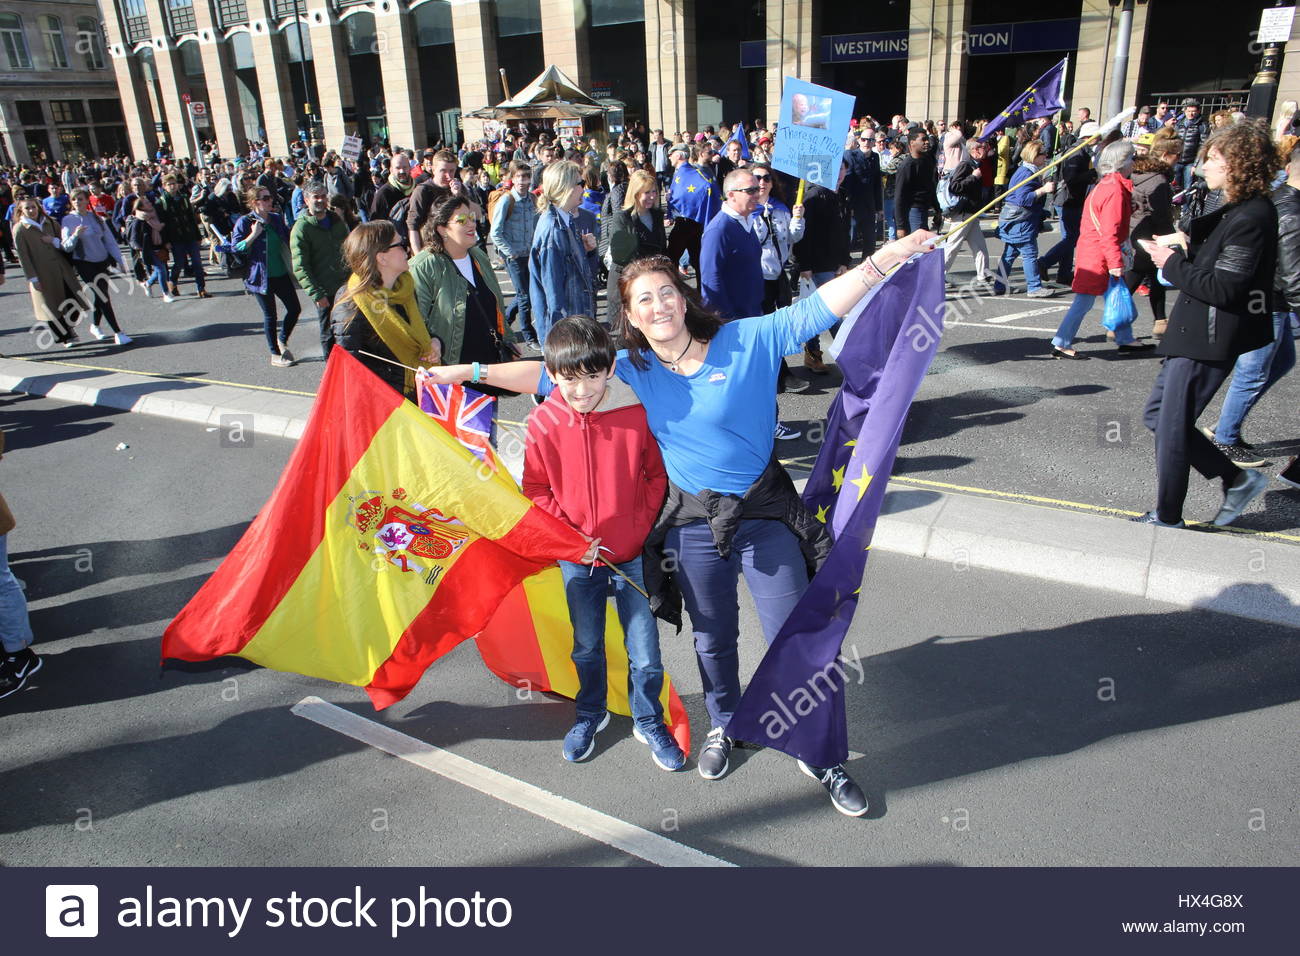 Protestors at the Unite for Europe rally in London wave Spanish and EU flags as the rally draws to a close Stock Photo